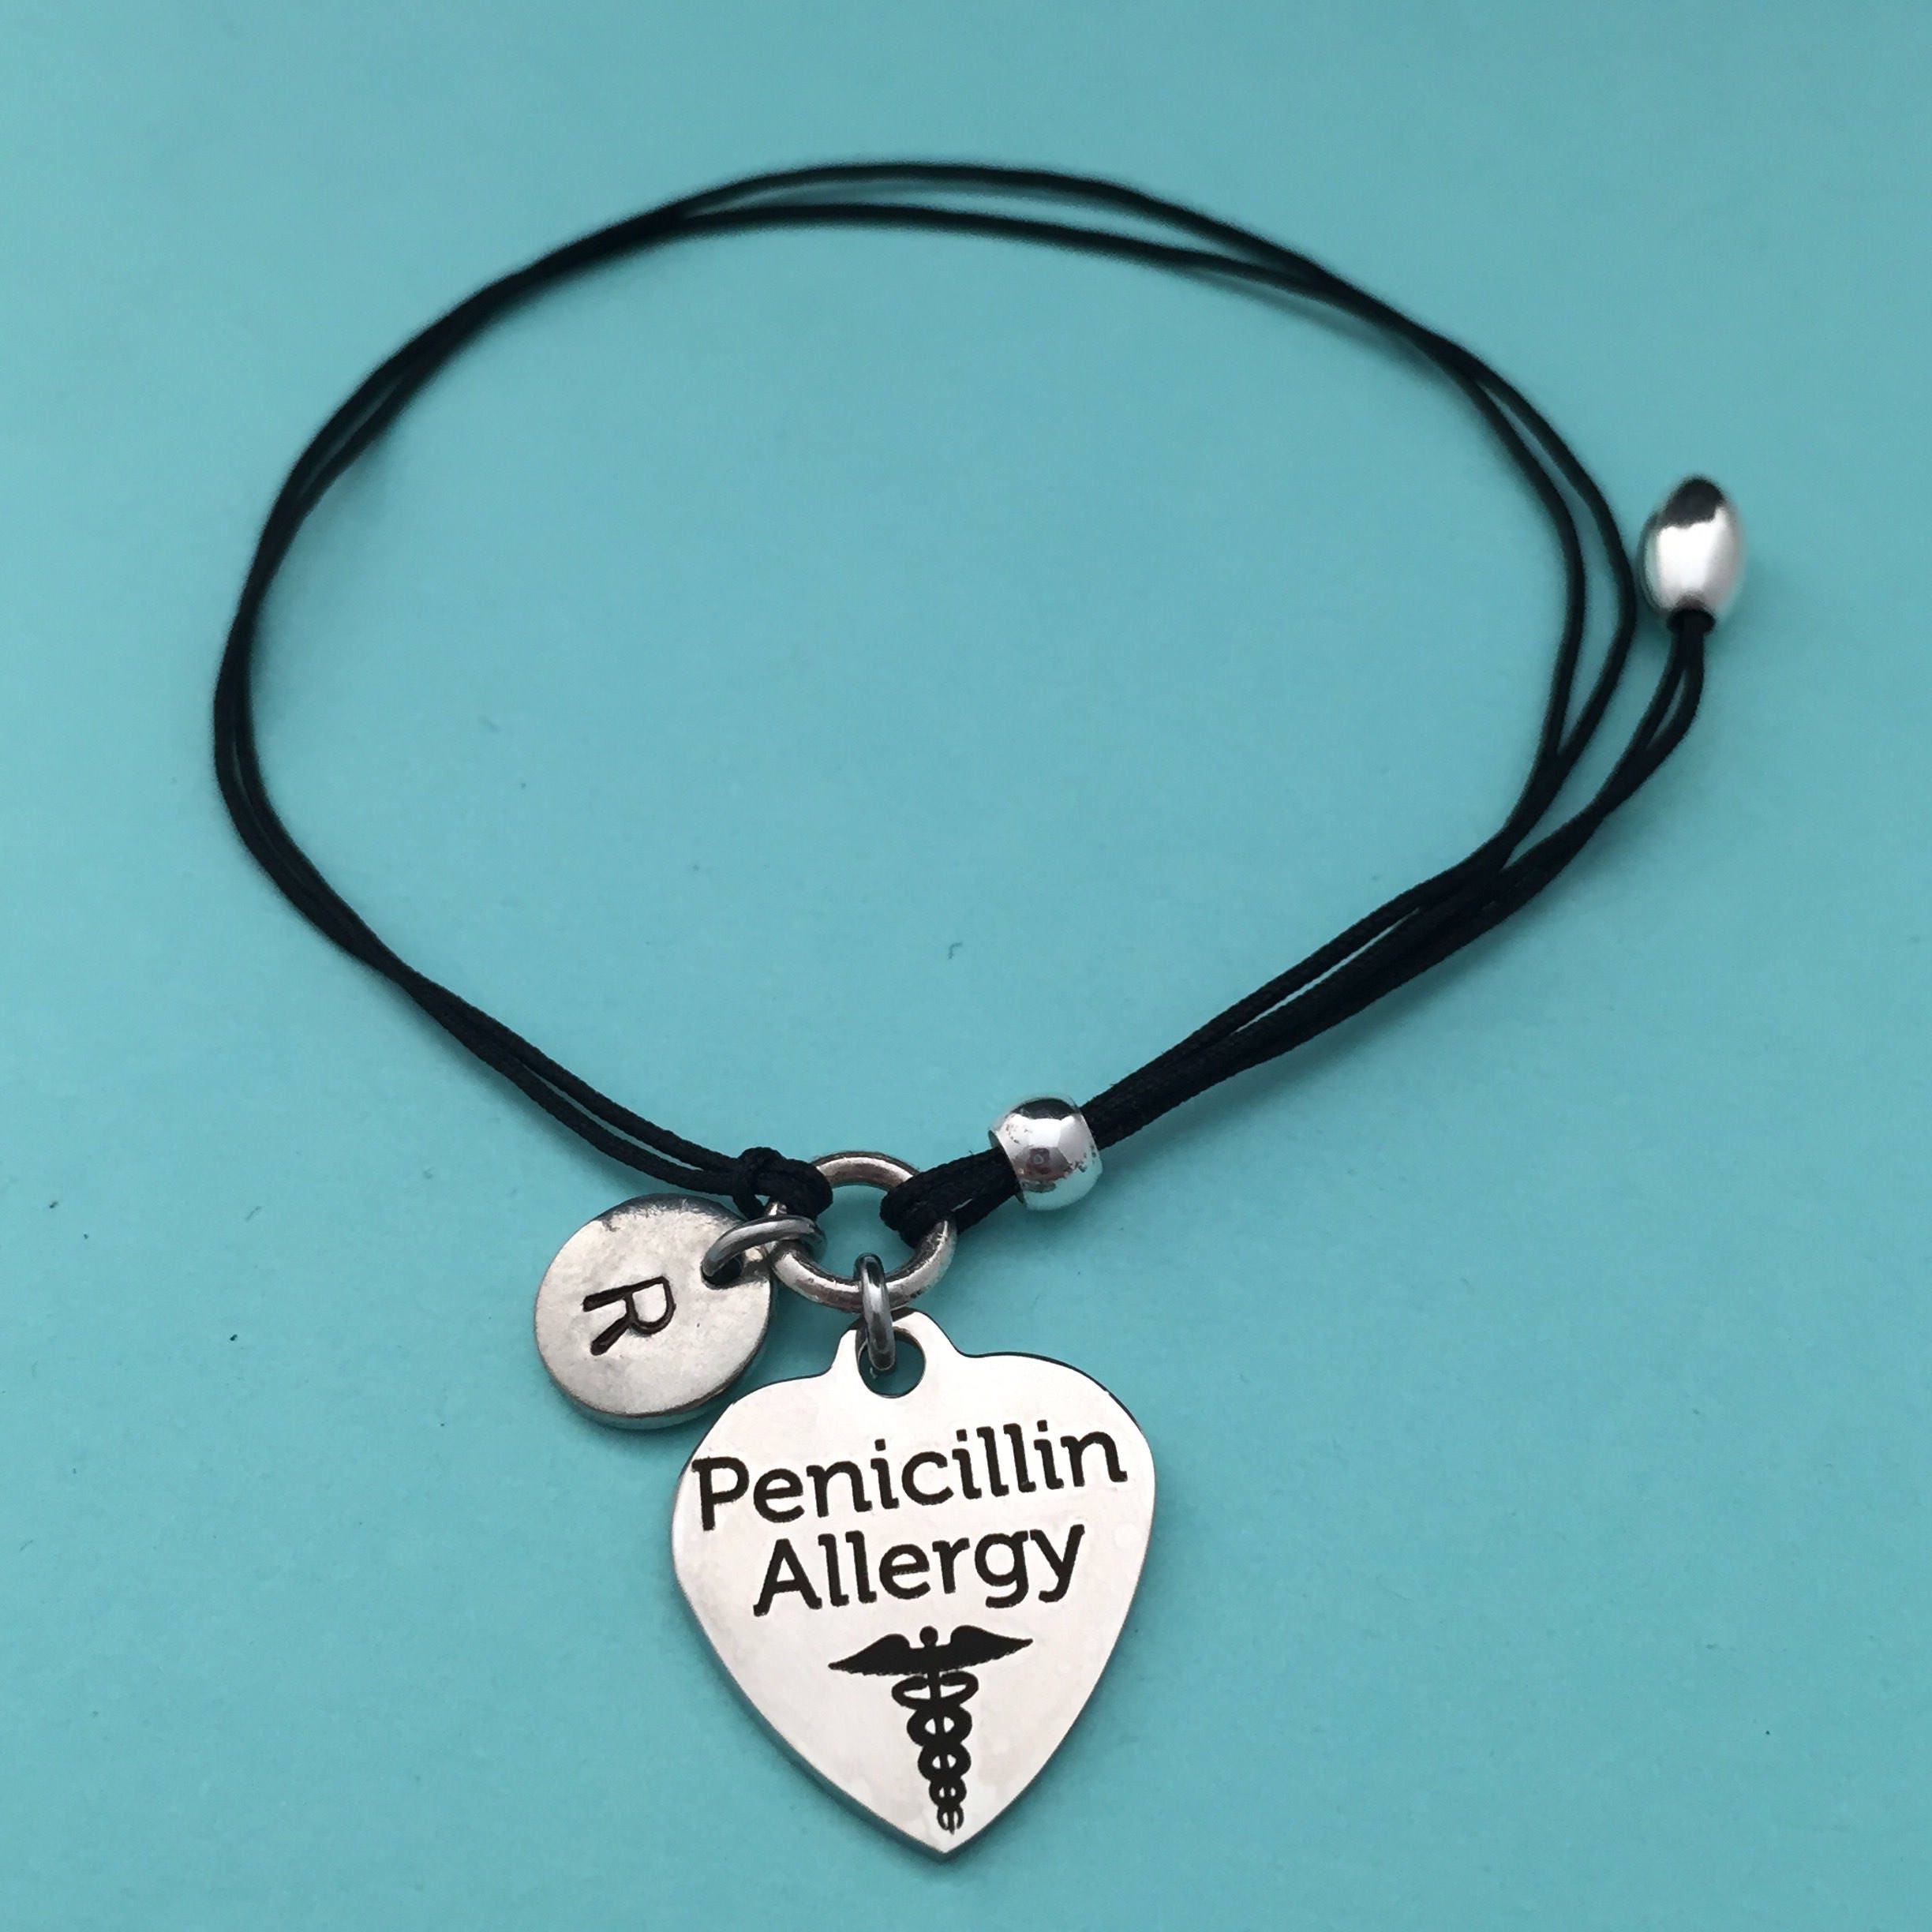 Pre-engraved “ALLERGIC TO PENICILLIN” TAN LEATHER Medical Alert Bracelet.  Choose From a Variety of Colors! – Universal Medical Data